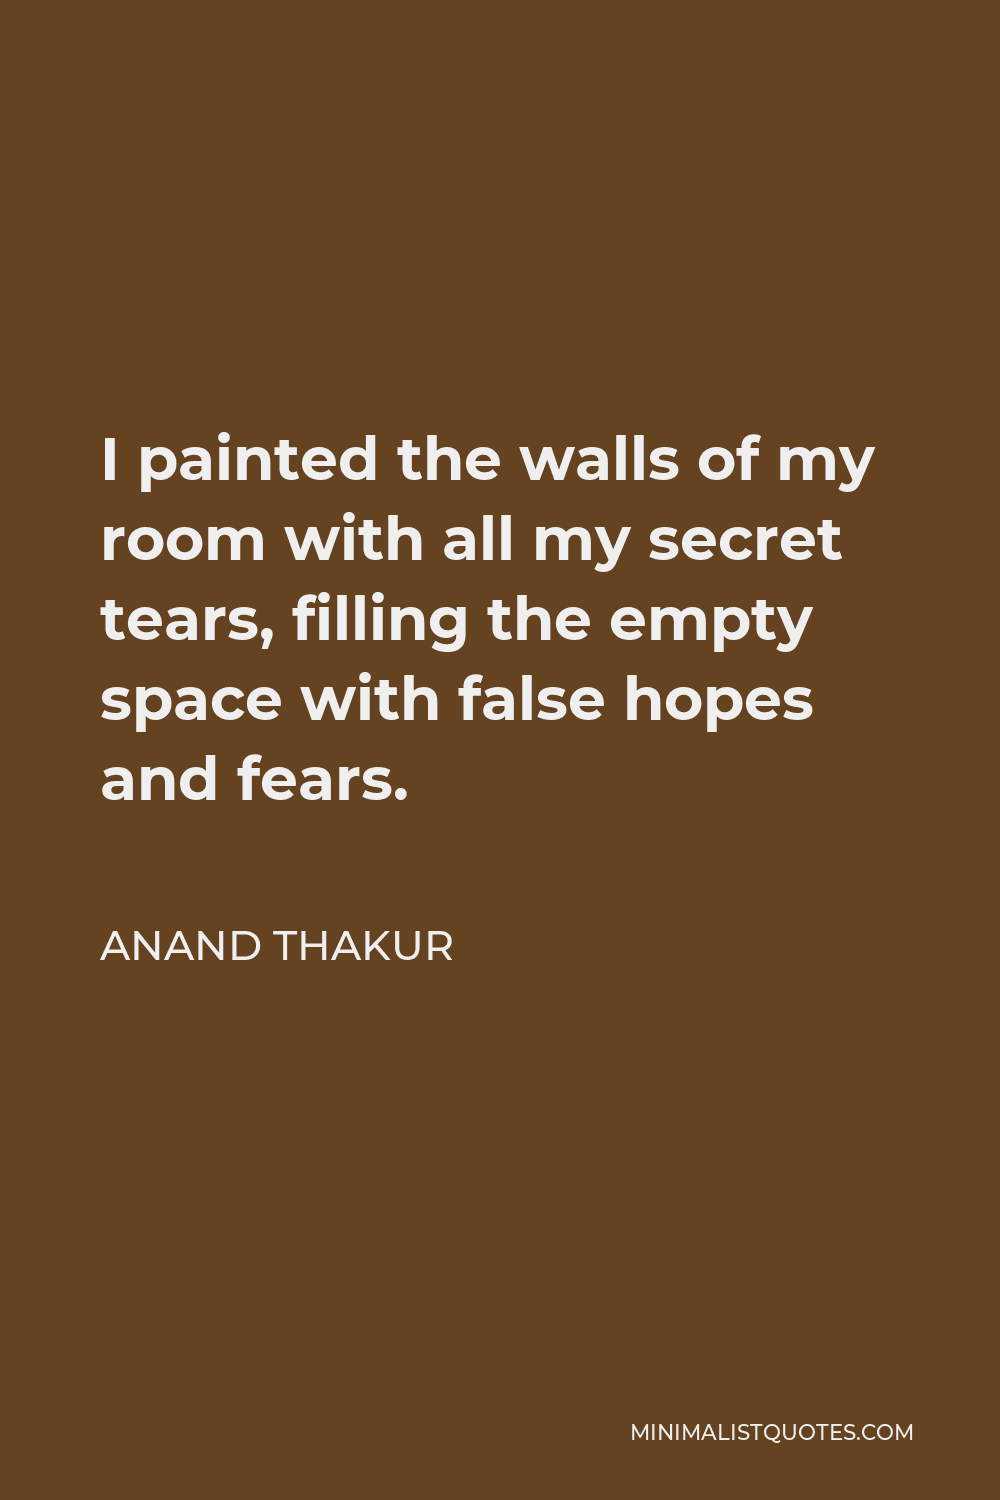 Anand Thakur Quote - I painted the walls of my room with all my secret tears, filling the empty space with false hopes and fears.